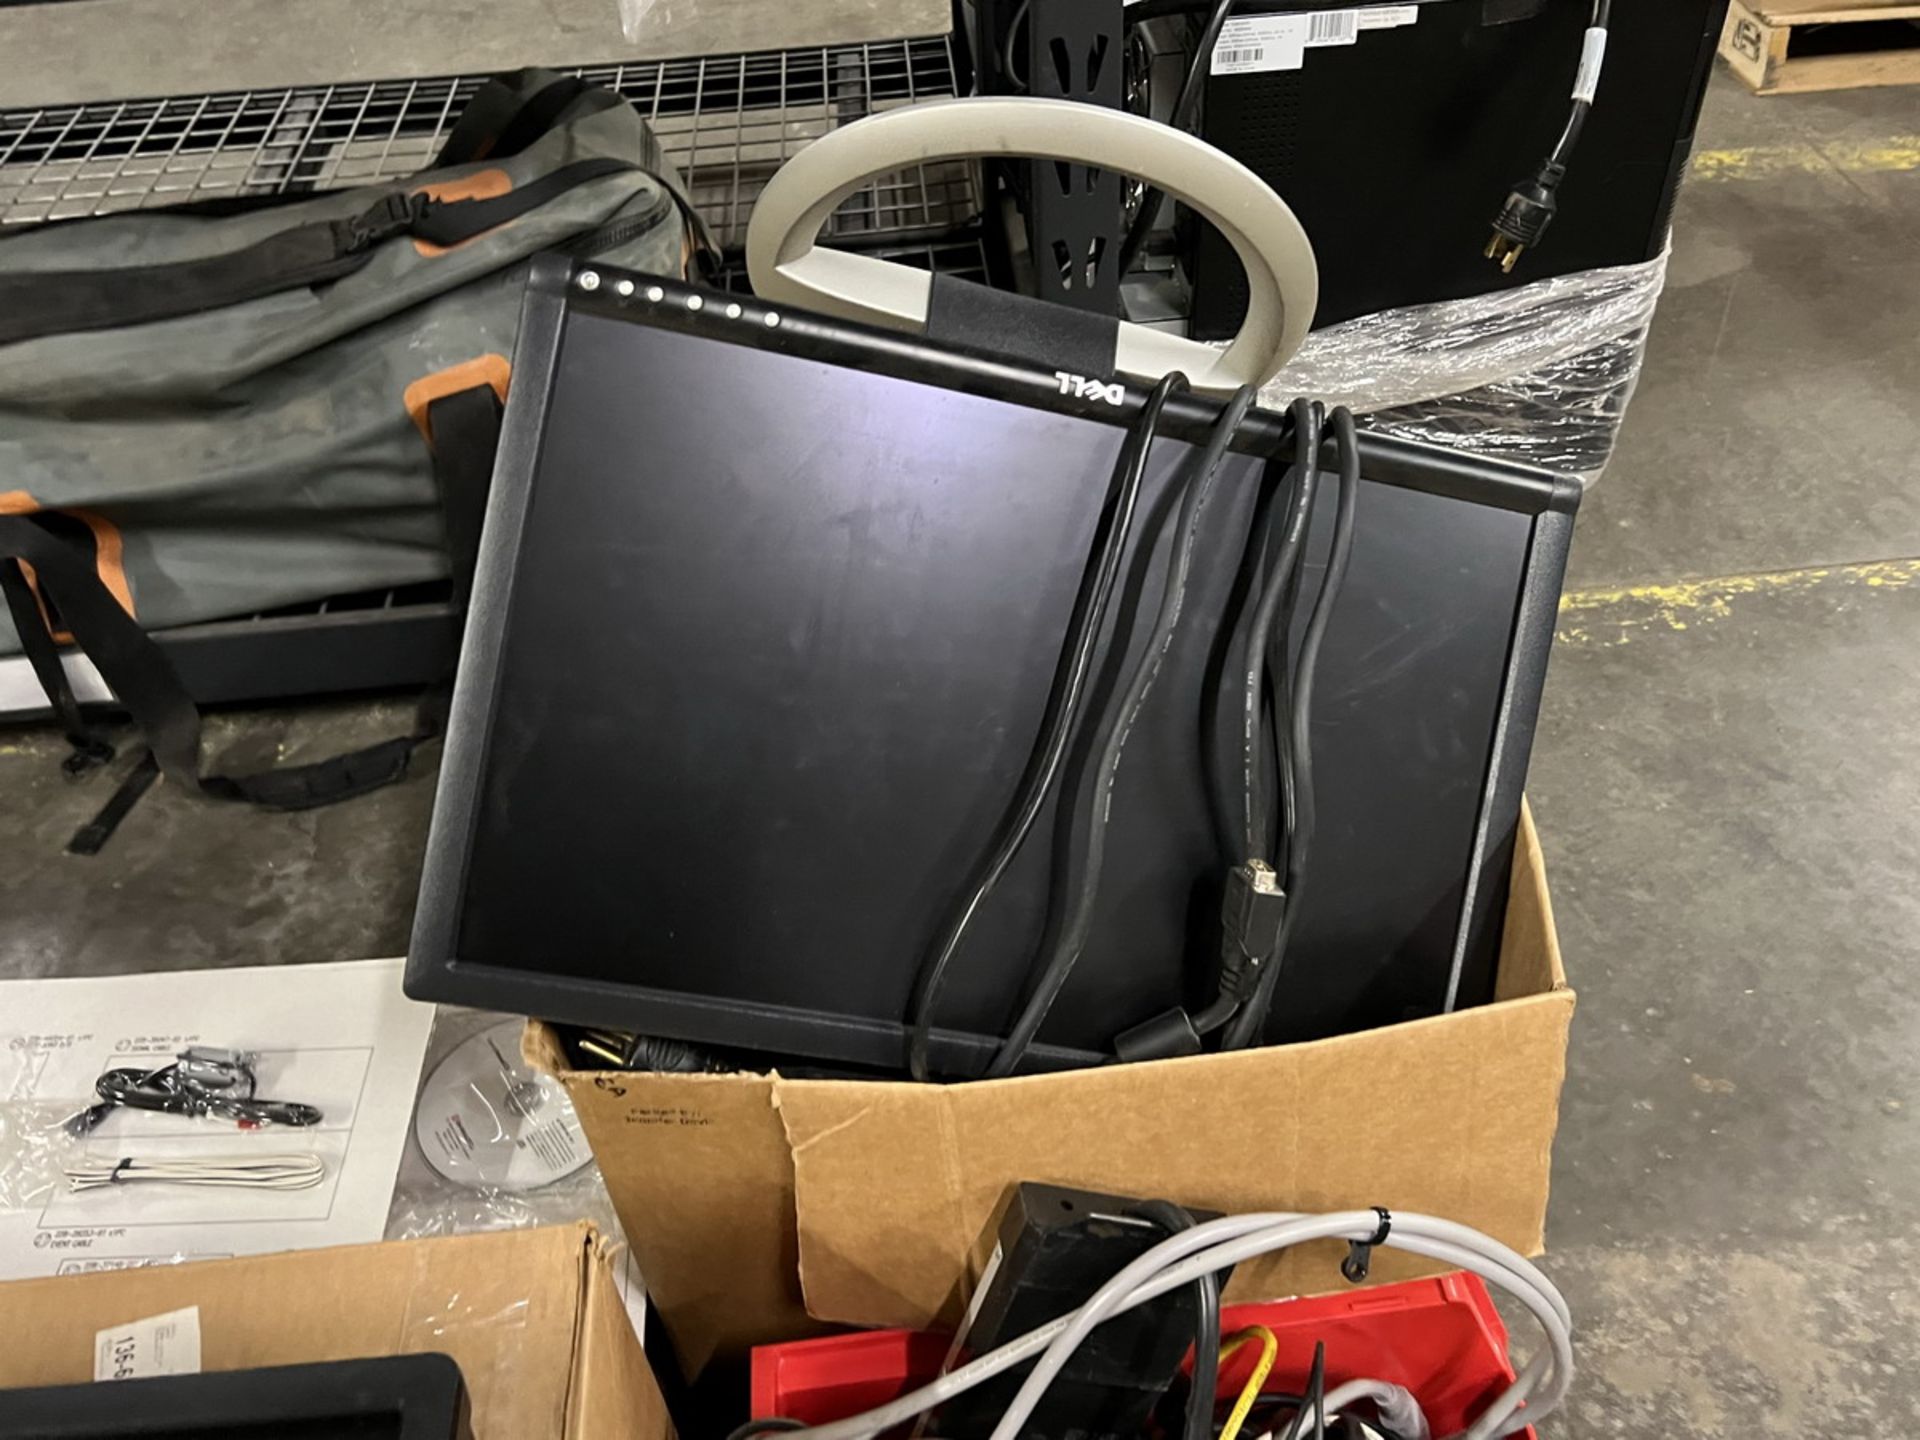 Lot - Assorted Computer Screens, Keyboards, Mice, Servers and Wires (on Skid) - Image 4 of 7